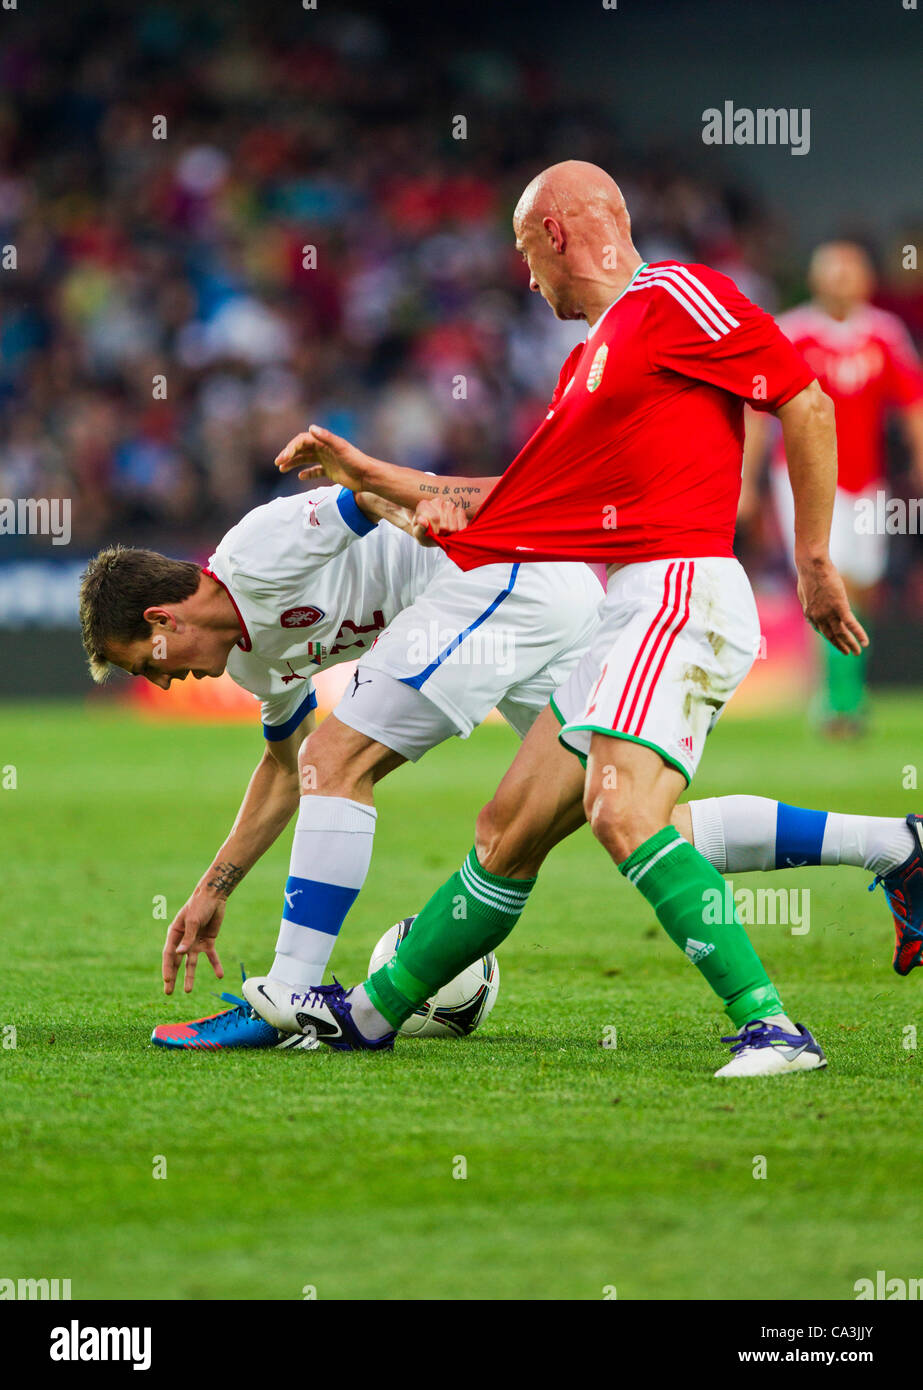 Vladimir Darida of Czech Republic (left) challenges for the ball with Jozsef Varga of Hungary during their friendly match in Prague, Generali Arena, on Friday, June 1st, 2012. (CTK Photo/Rene Fluger) Stock Photo